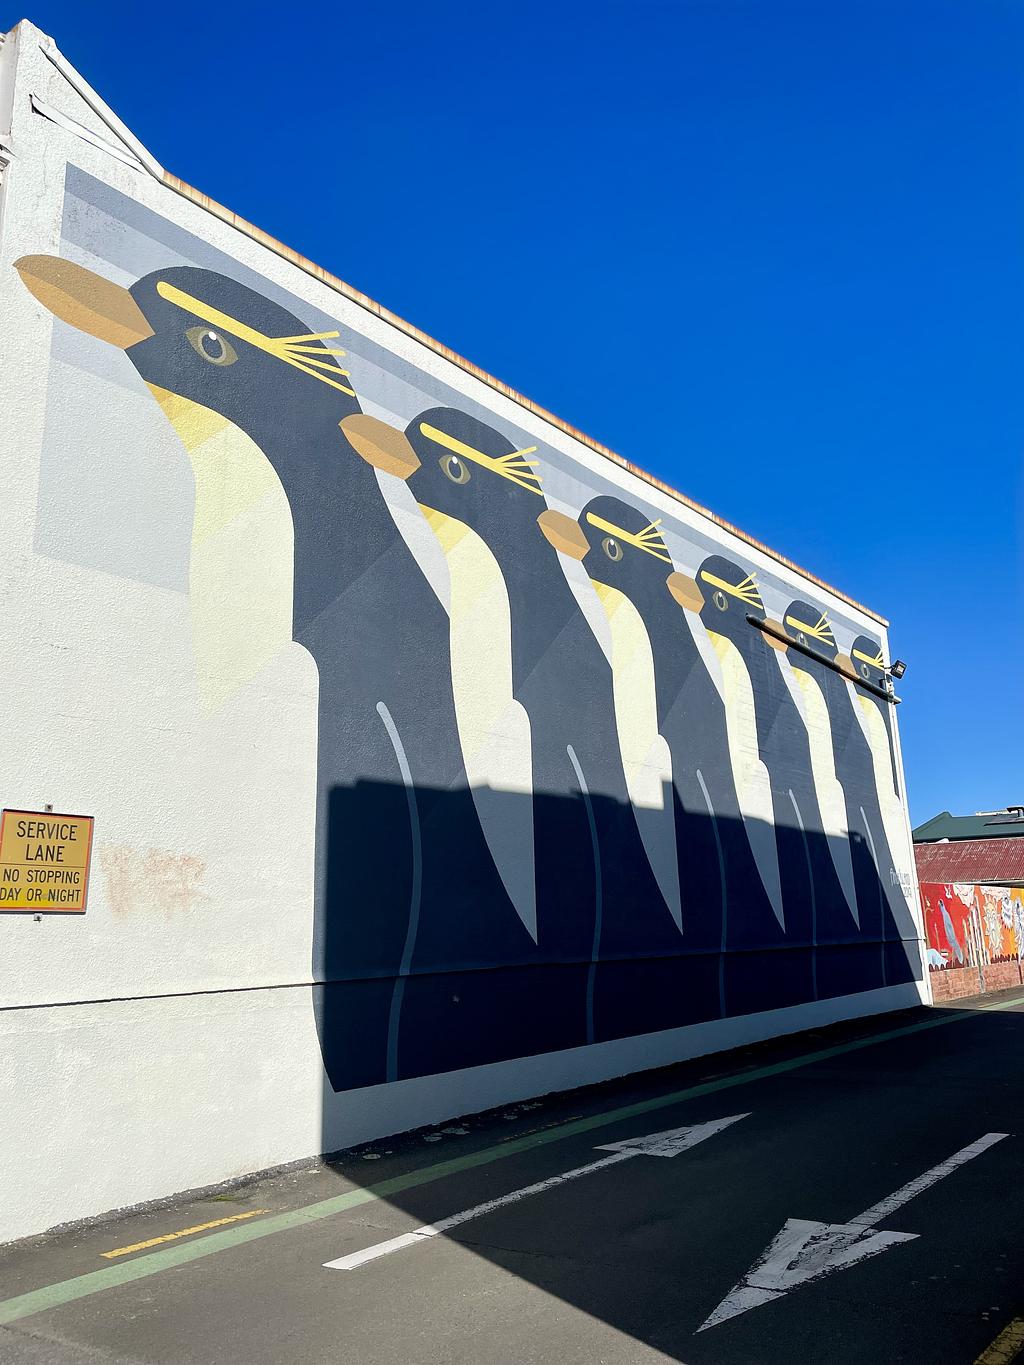 A line of 6 penguins graffitied on a wall